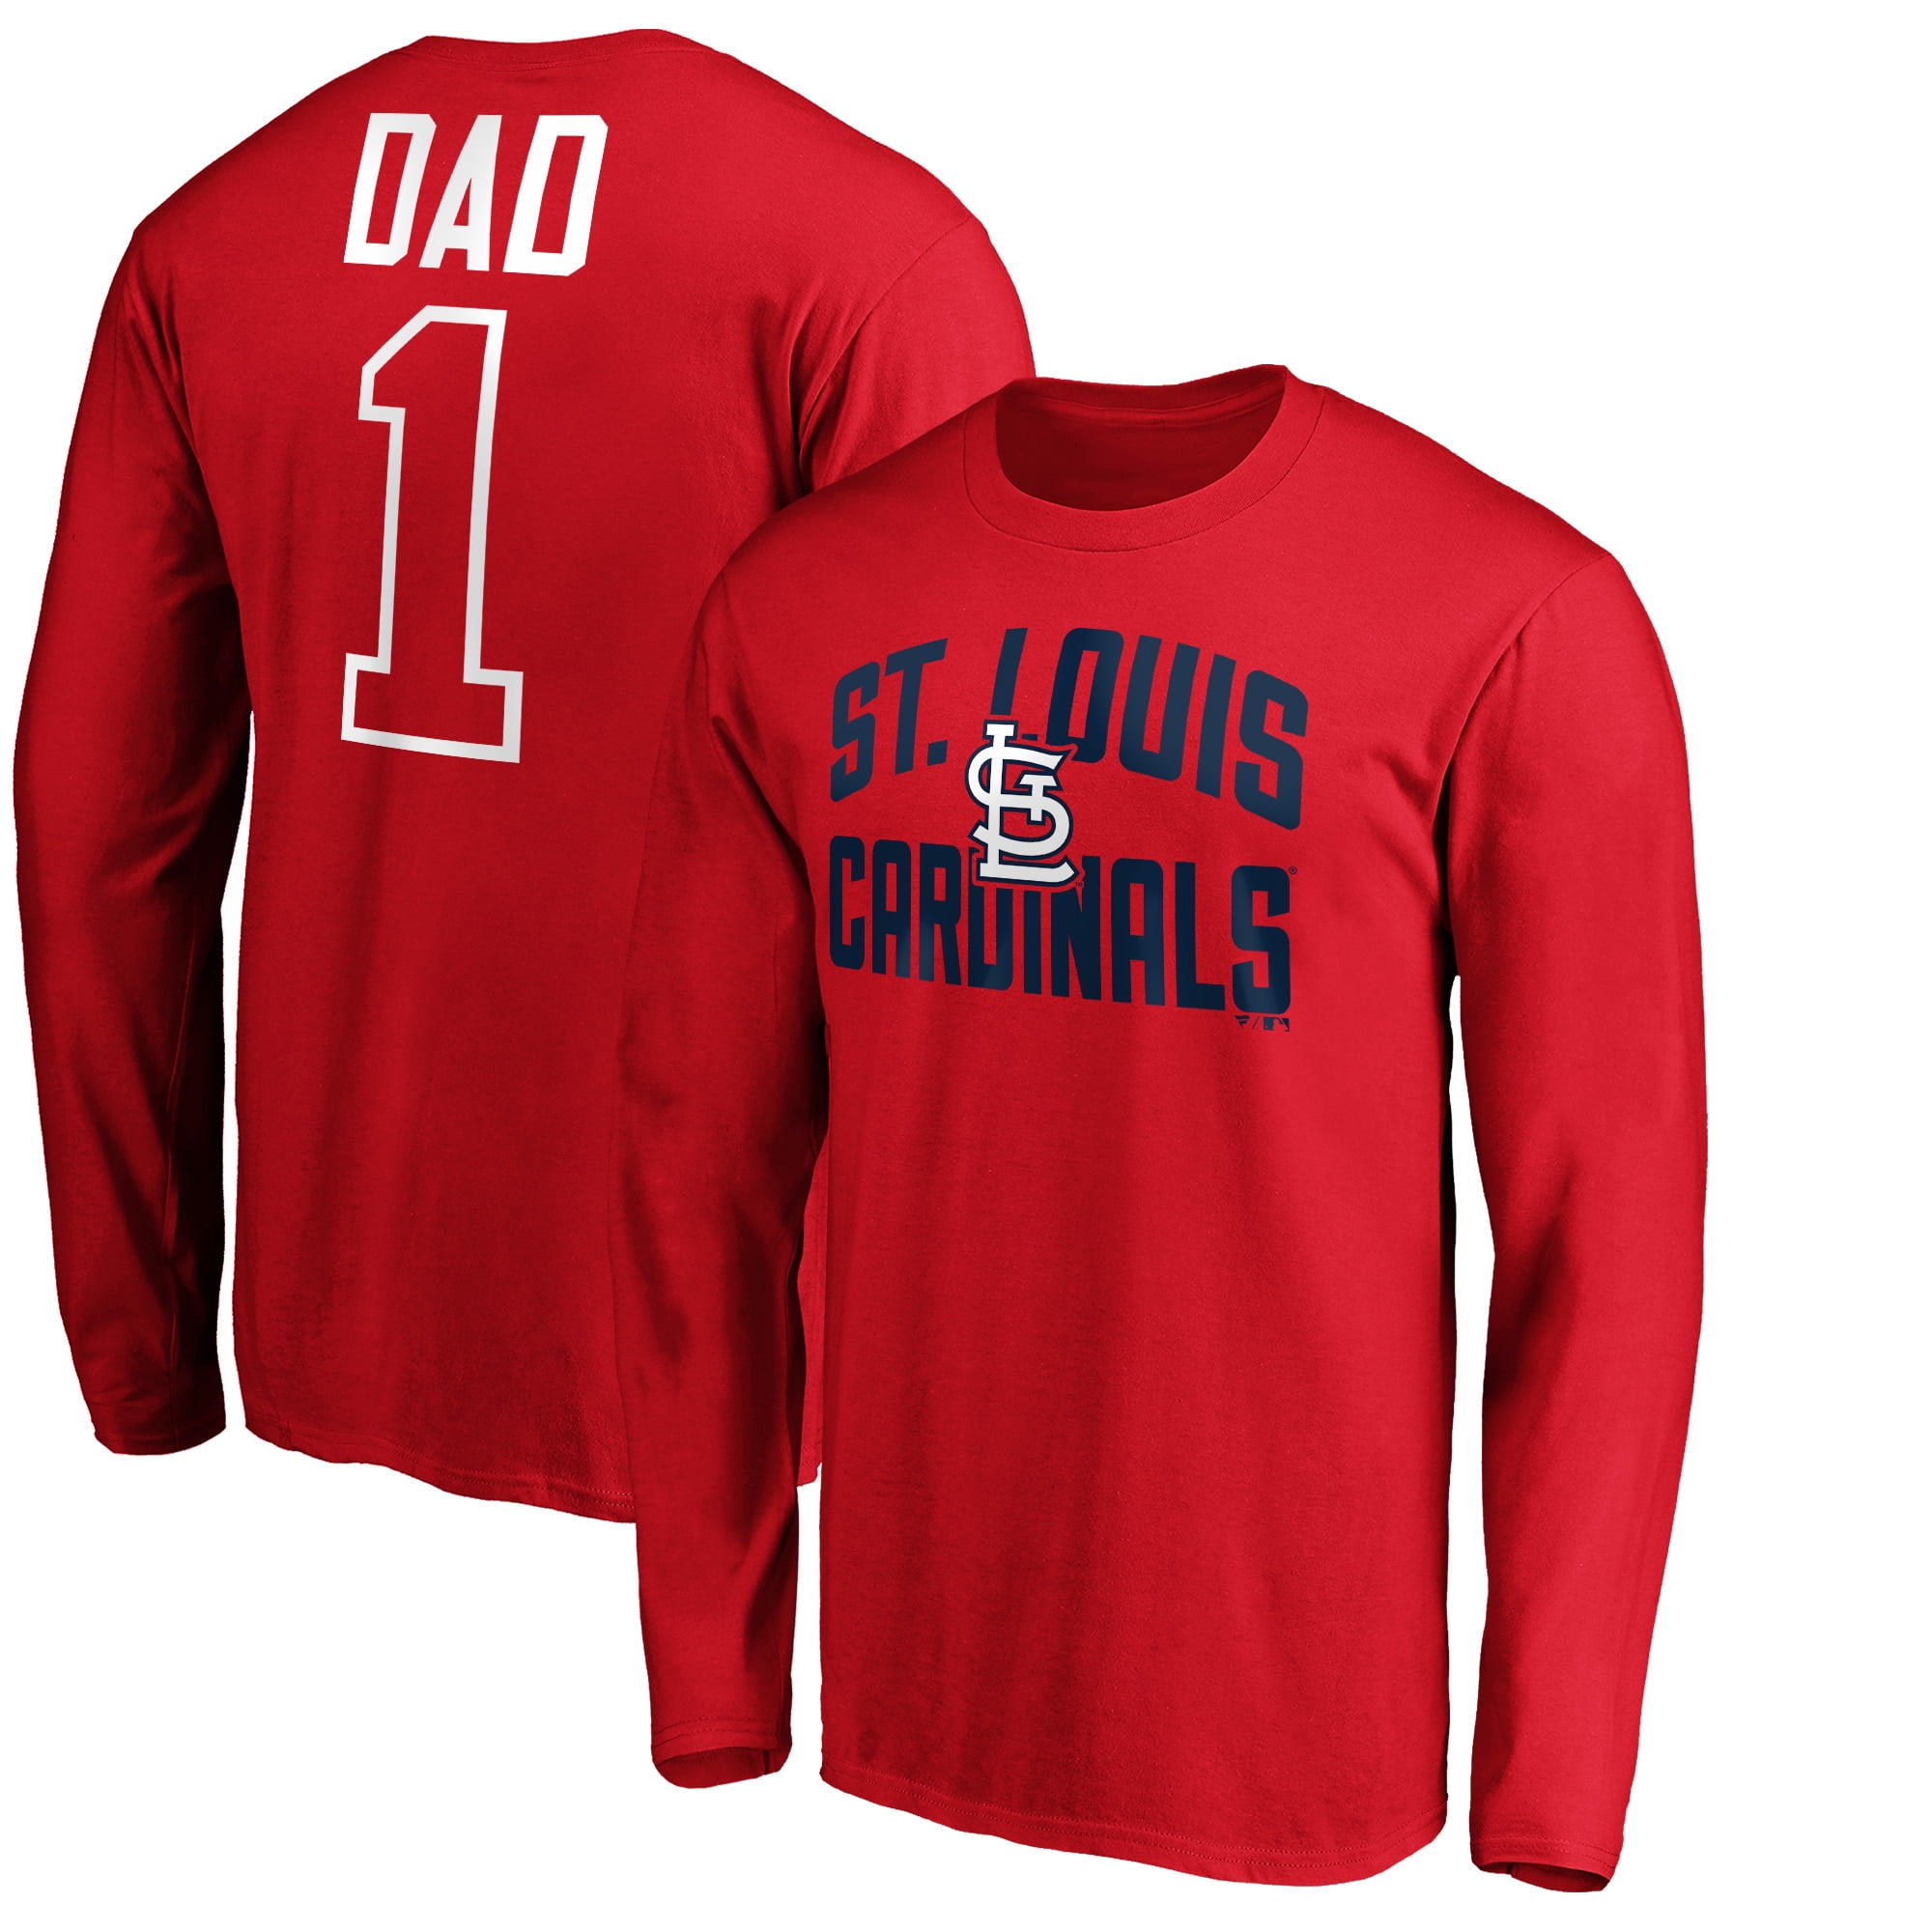 cardinals father's day jersey